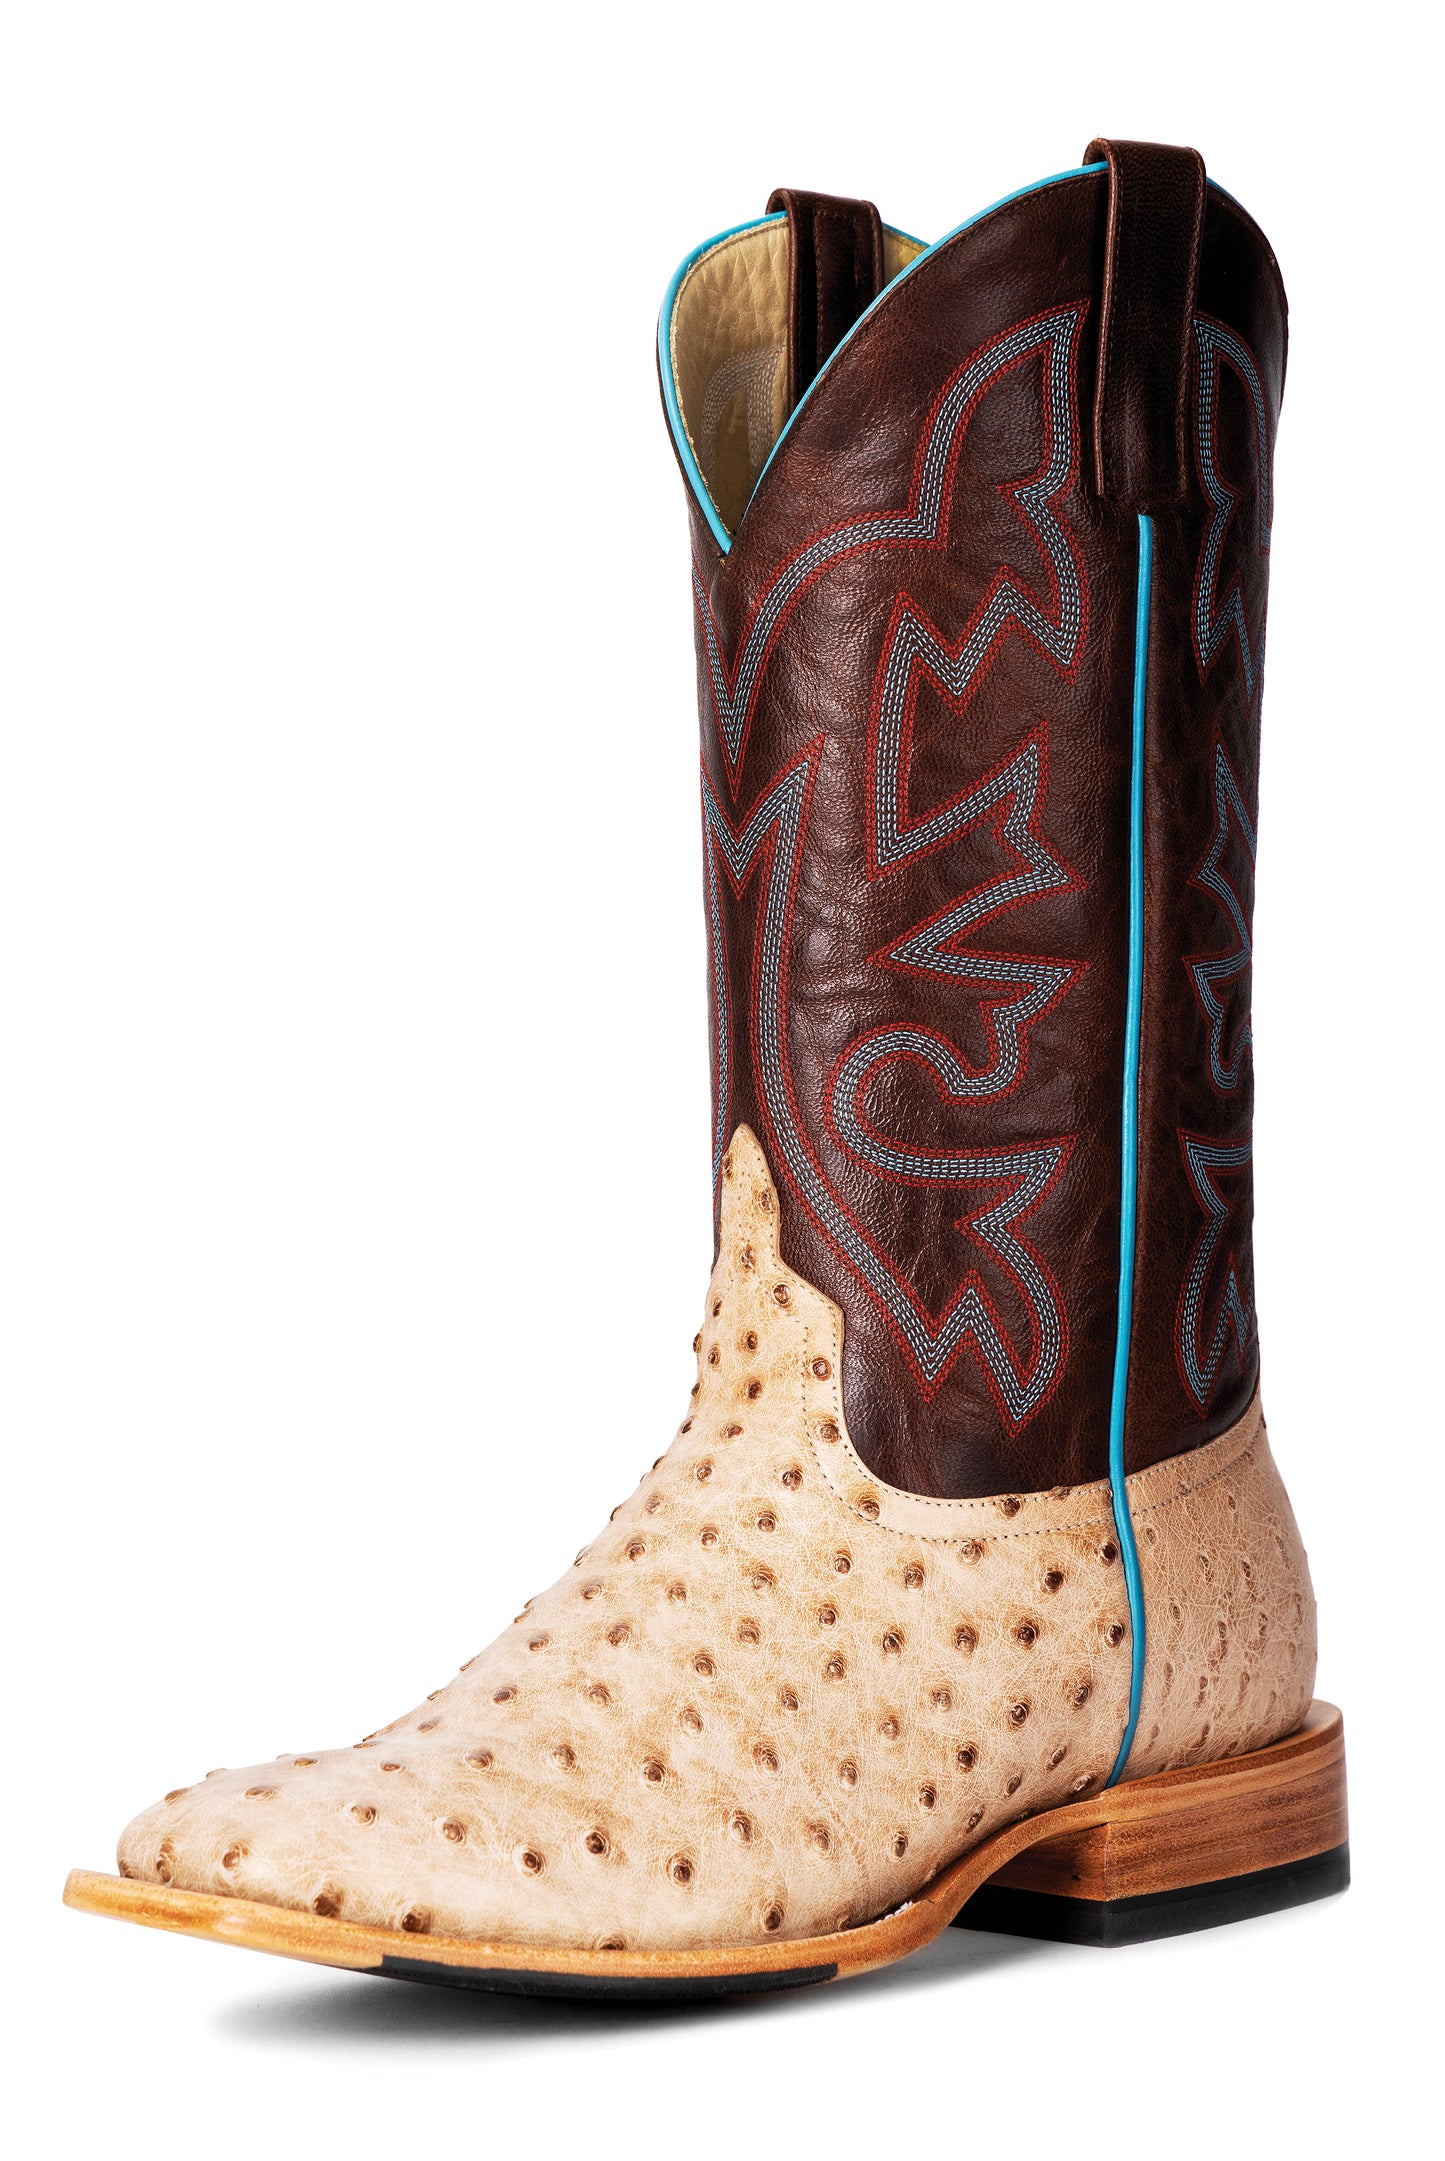 HORSE POWER TAN VINTAGE BROCIATO FULL QUILL OSTRICH BOOT